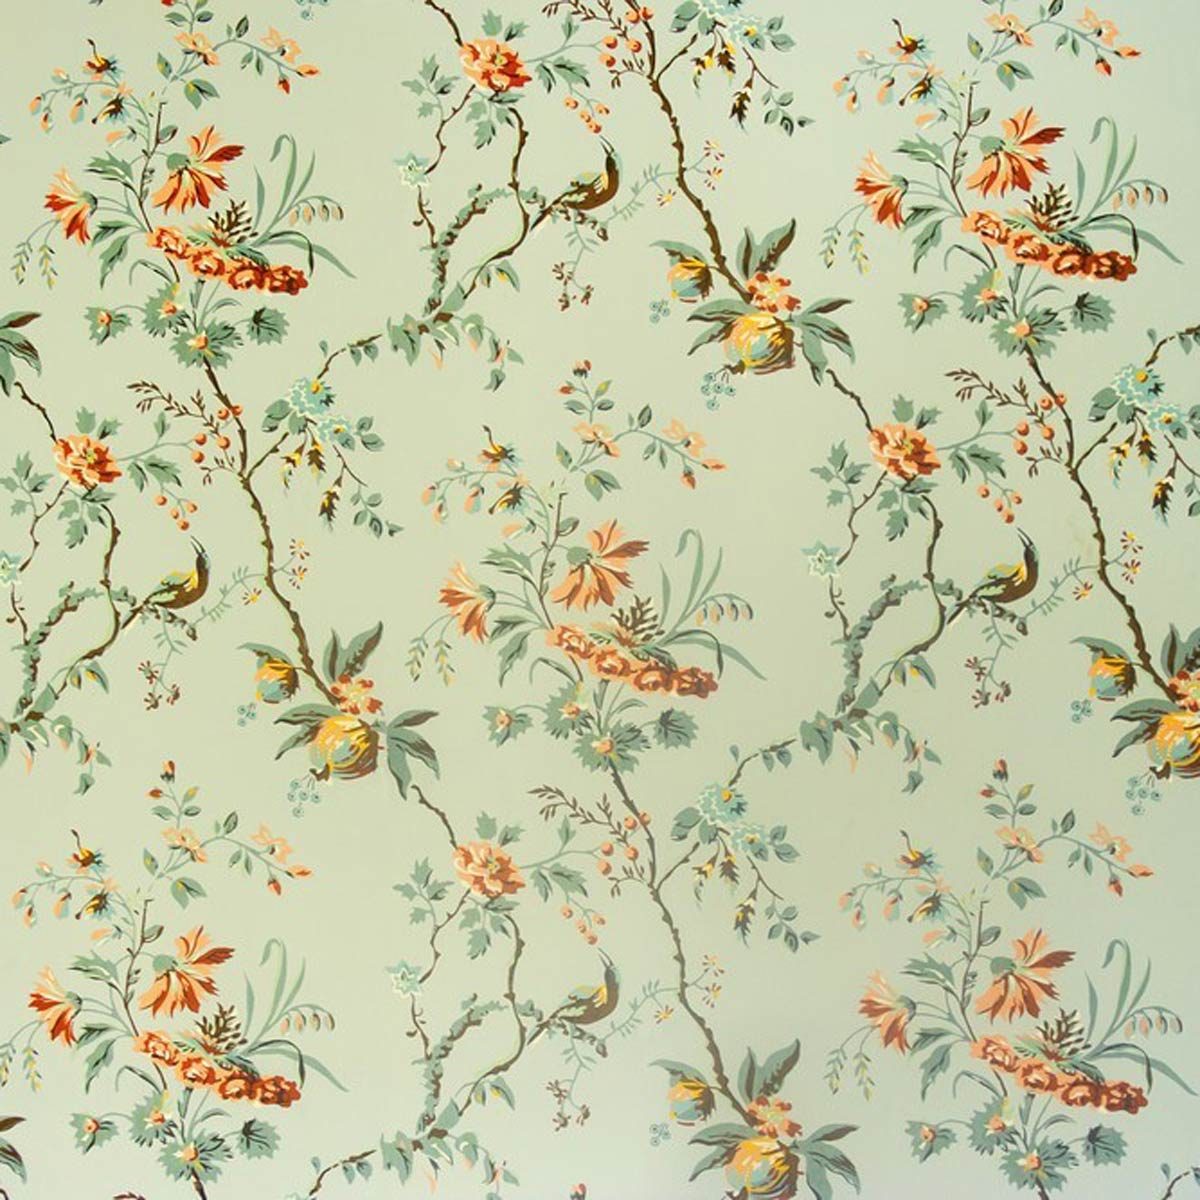 Dated: Old Wallpaper and Borders